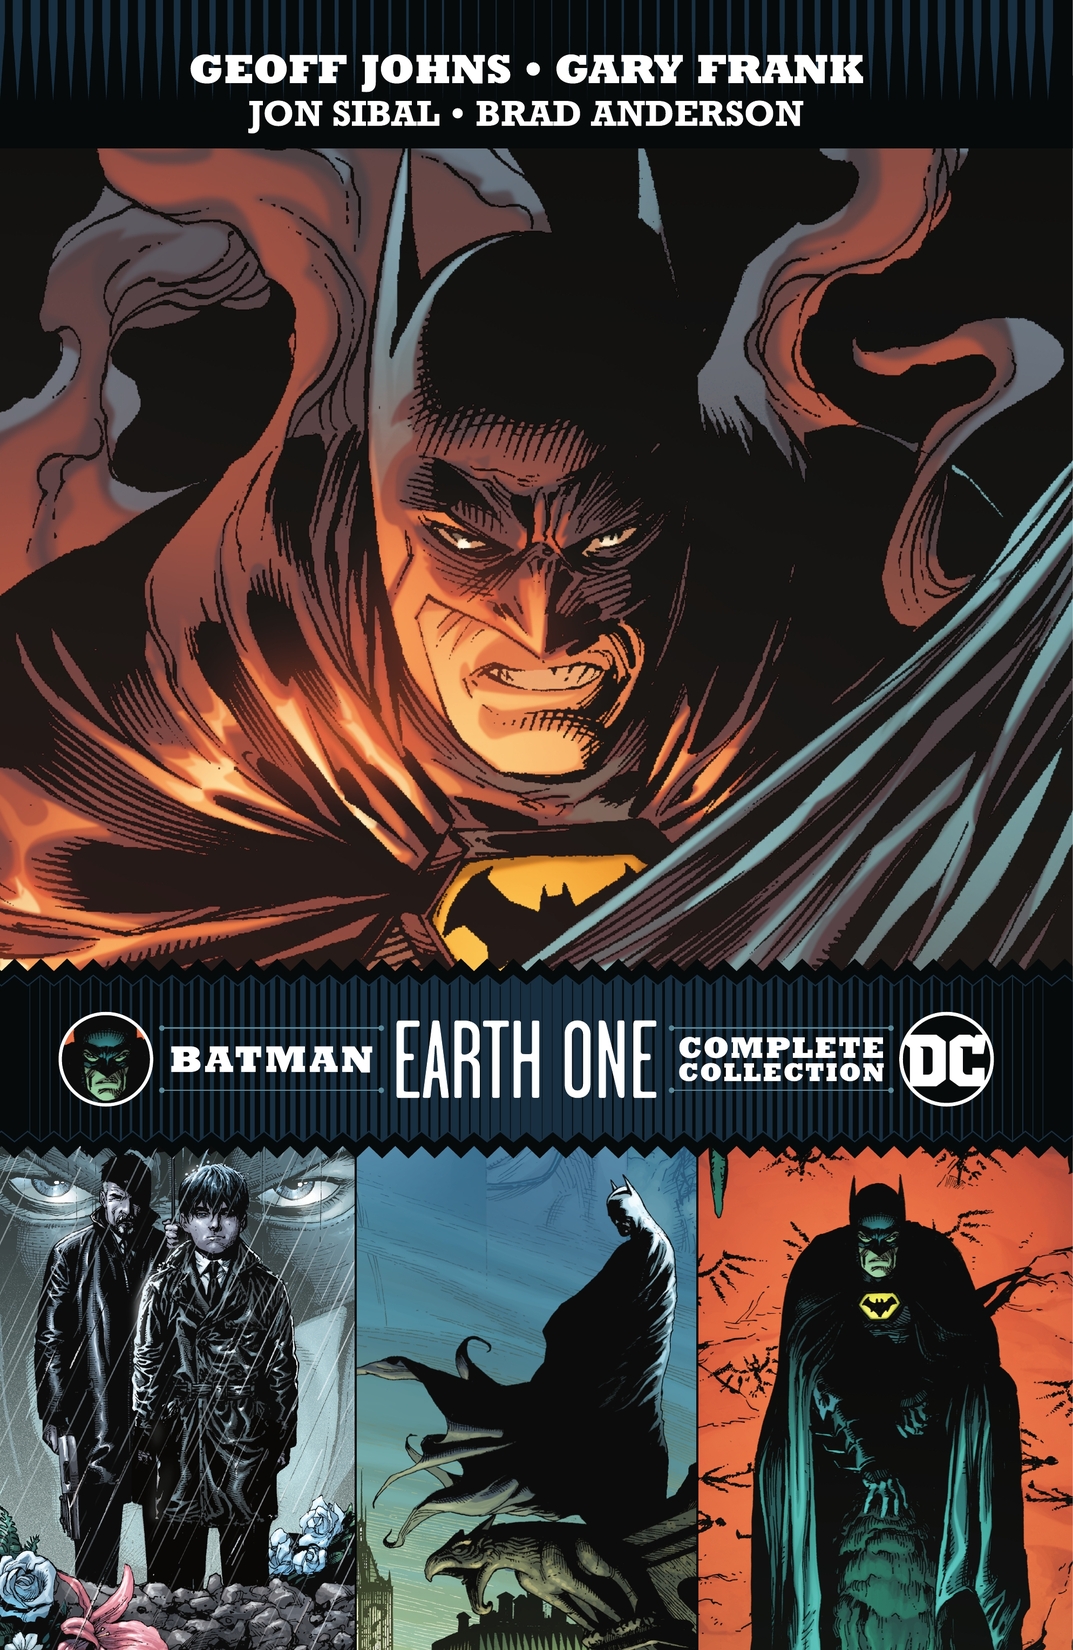 Batman: Earth One Complete Collection preview images